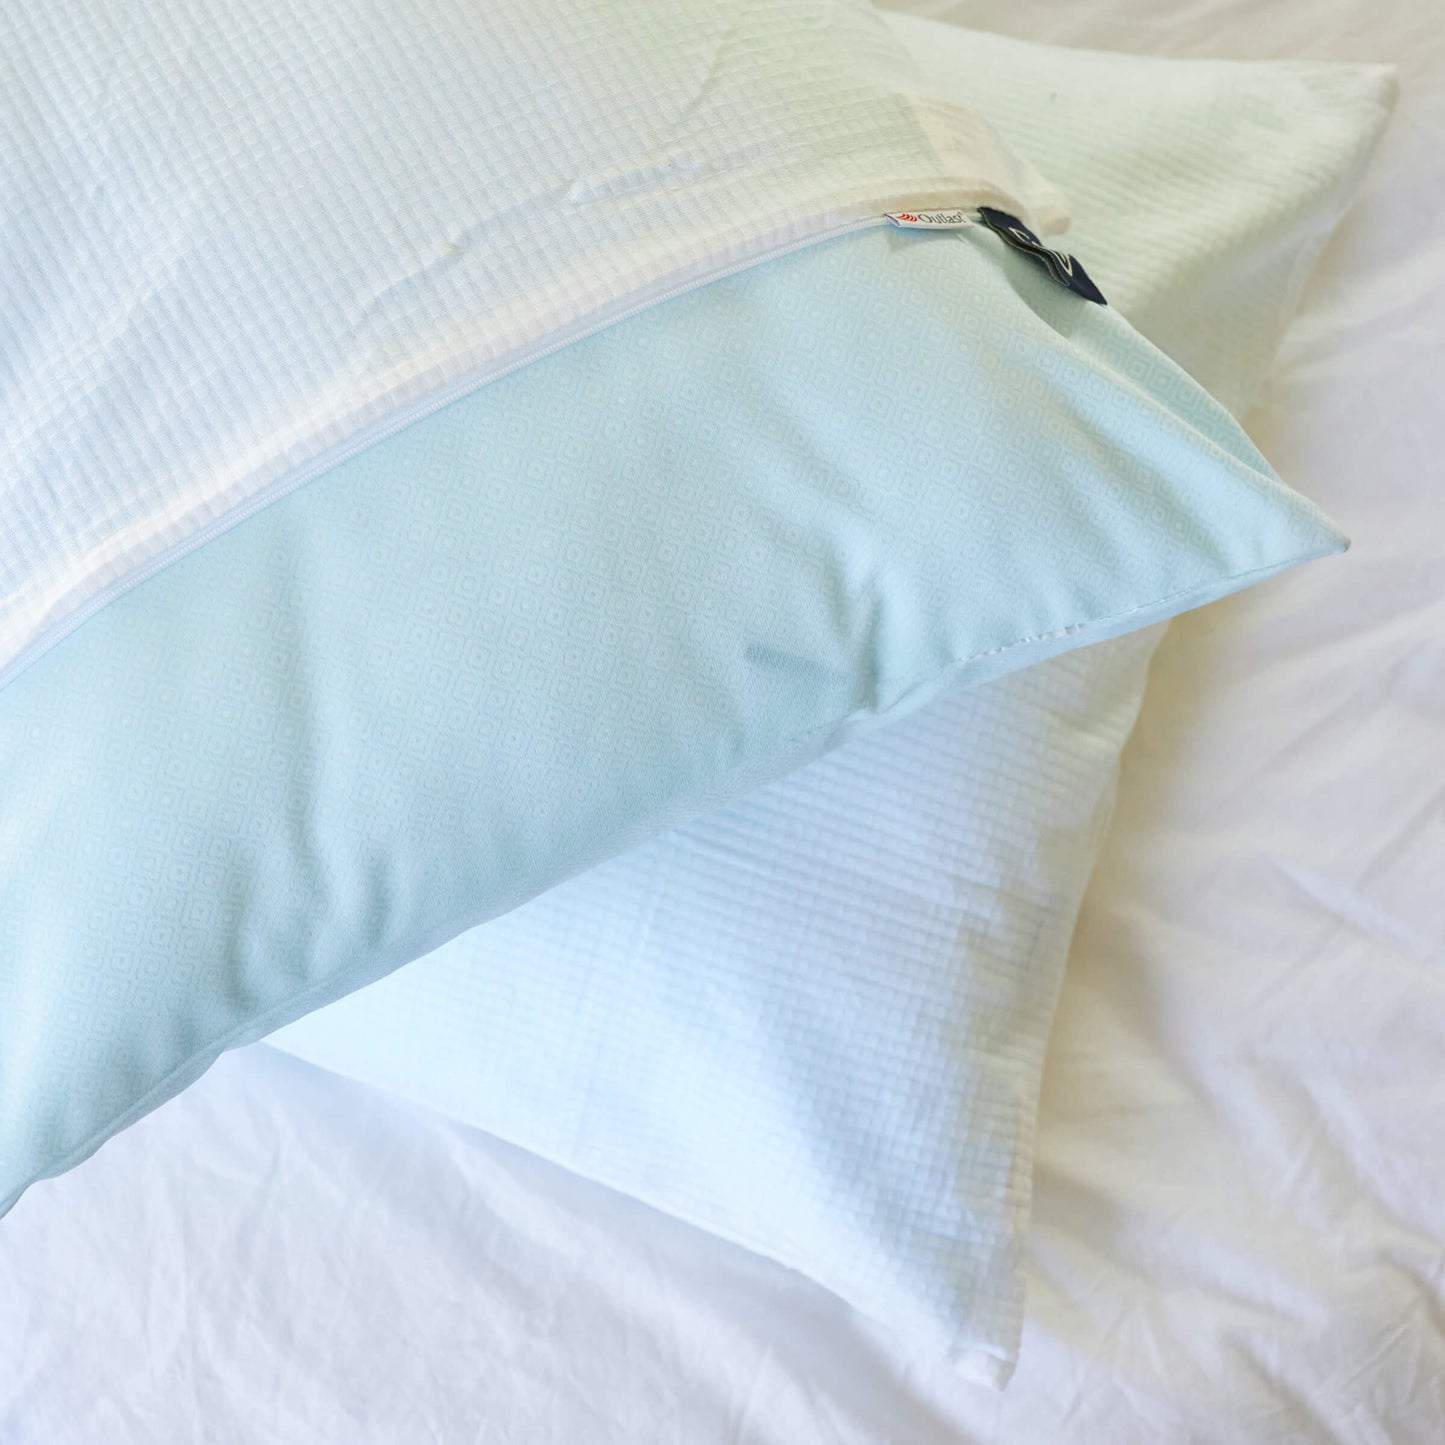 The Slumber Cloud Performance Pillow Bundle, consisting of two UltraCool Pillows and a set of Performance Pillow Covers all made with Outlast Temperature regulation technology